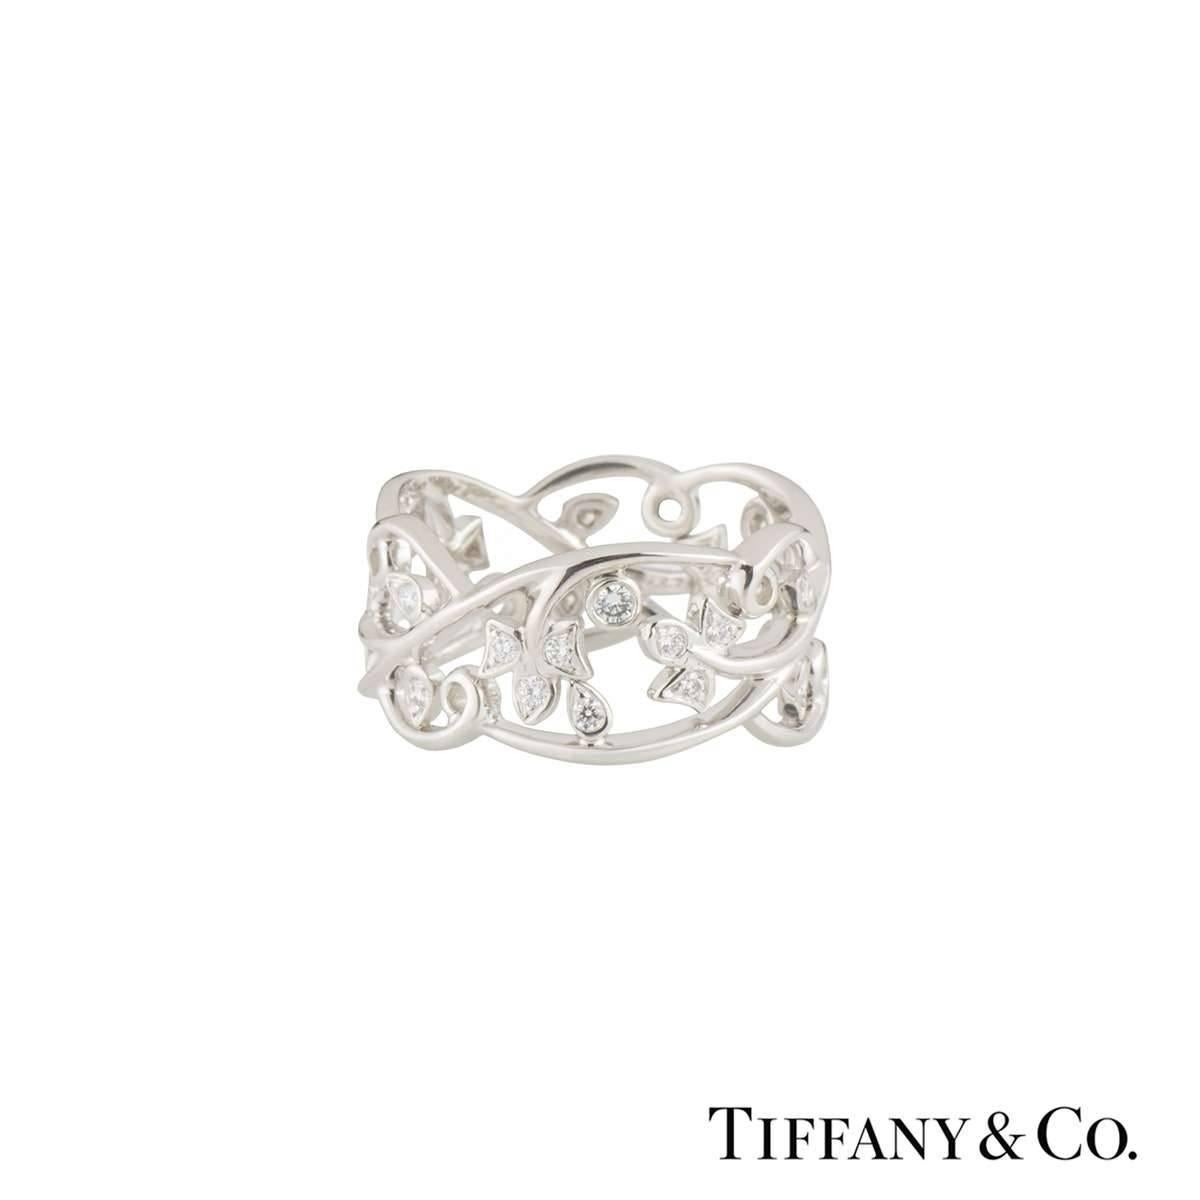 A lovely platinum Tiffany & Co. diamond dress ring. The ring comprises of an open work floral design with 30 round brilliant cut diamonds set around the band. The diamonds have a total weight of approximately 0.51ct, G colour and VS+ clarity.